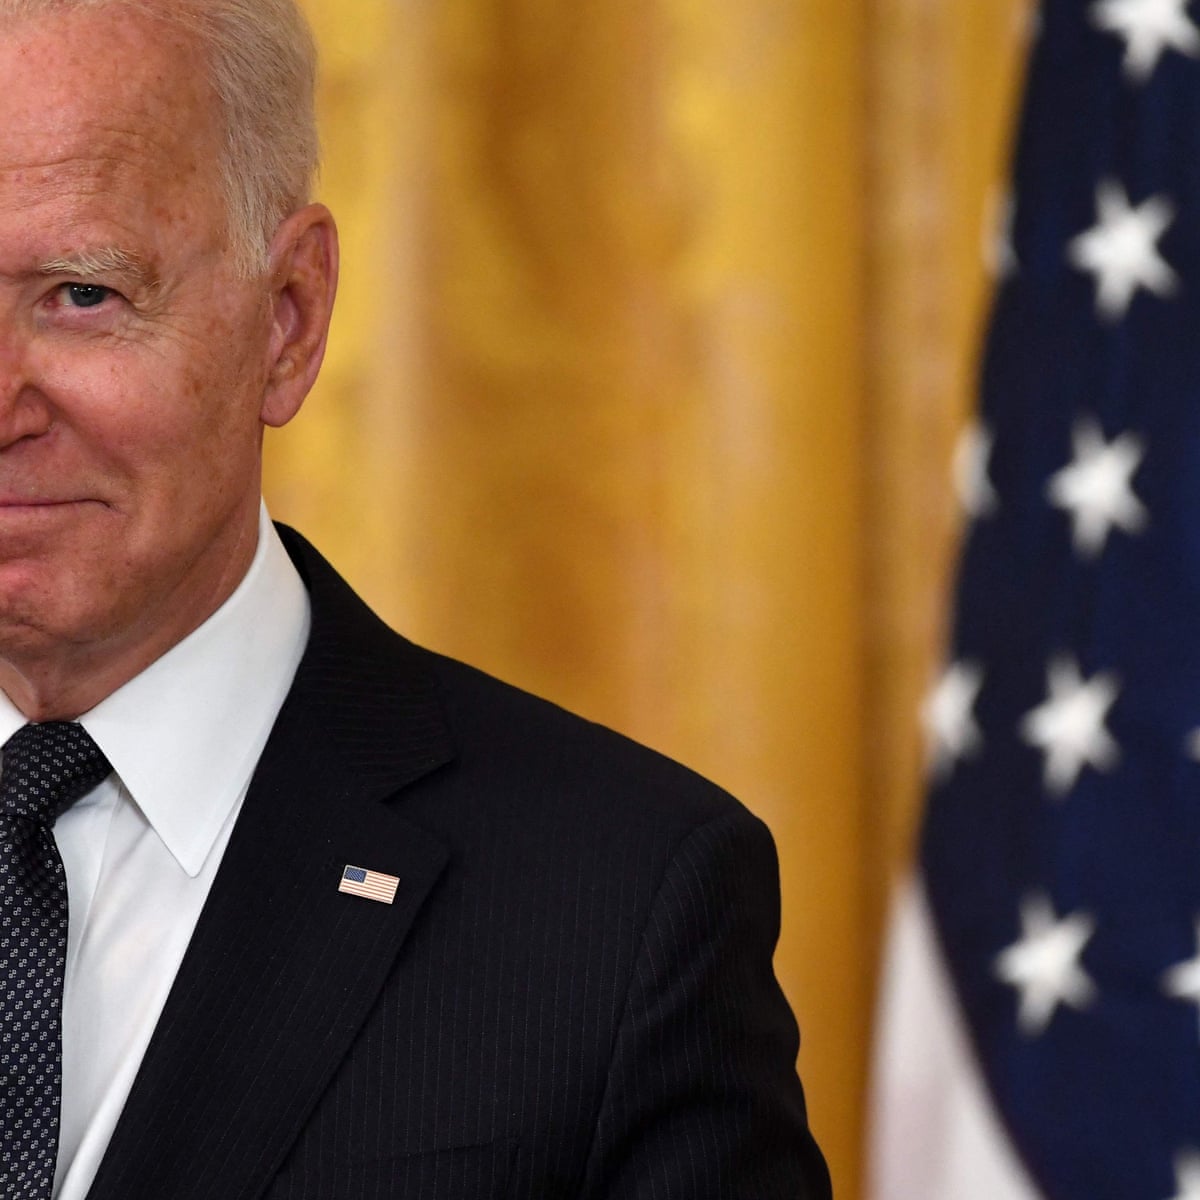 joe biden has prosec - Biden|President|Joe|States|Delaware|Obama|Vice|Senate|Campaign|Election|Time|Administration|House|Law|People|Years|Family|Year|Trump|School|University|Senator|Office|Party|Country|Committee|Act|War|Days|Climate|Hunter|Health|America|State|Day|Democrats|Americans|Documents|Care|Plan|United States|Vice President|White House|Joe Biden|Biden Administration|Democratic Party|Law School|Presidential Election|President Joe Biden|Executive Orders|Foreign Relations Committee|Presidential Campaign|Second Term|47Th Vice President|Syracuse University|Climate Change|Hillary Clinton|Last Year|Barack Obama|Joseph Robinette Biden|U.S. Senator|Health Care|U.S. Senate|Donald Trump|President Trump|President Biden|Federal Register|Judiciary Committee|Presidential Nomination|Presidential Medal